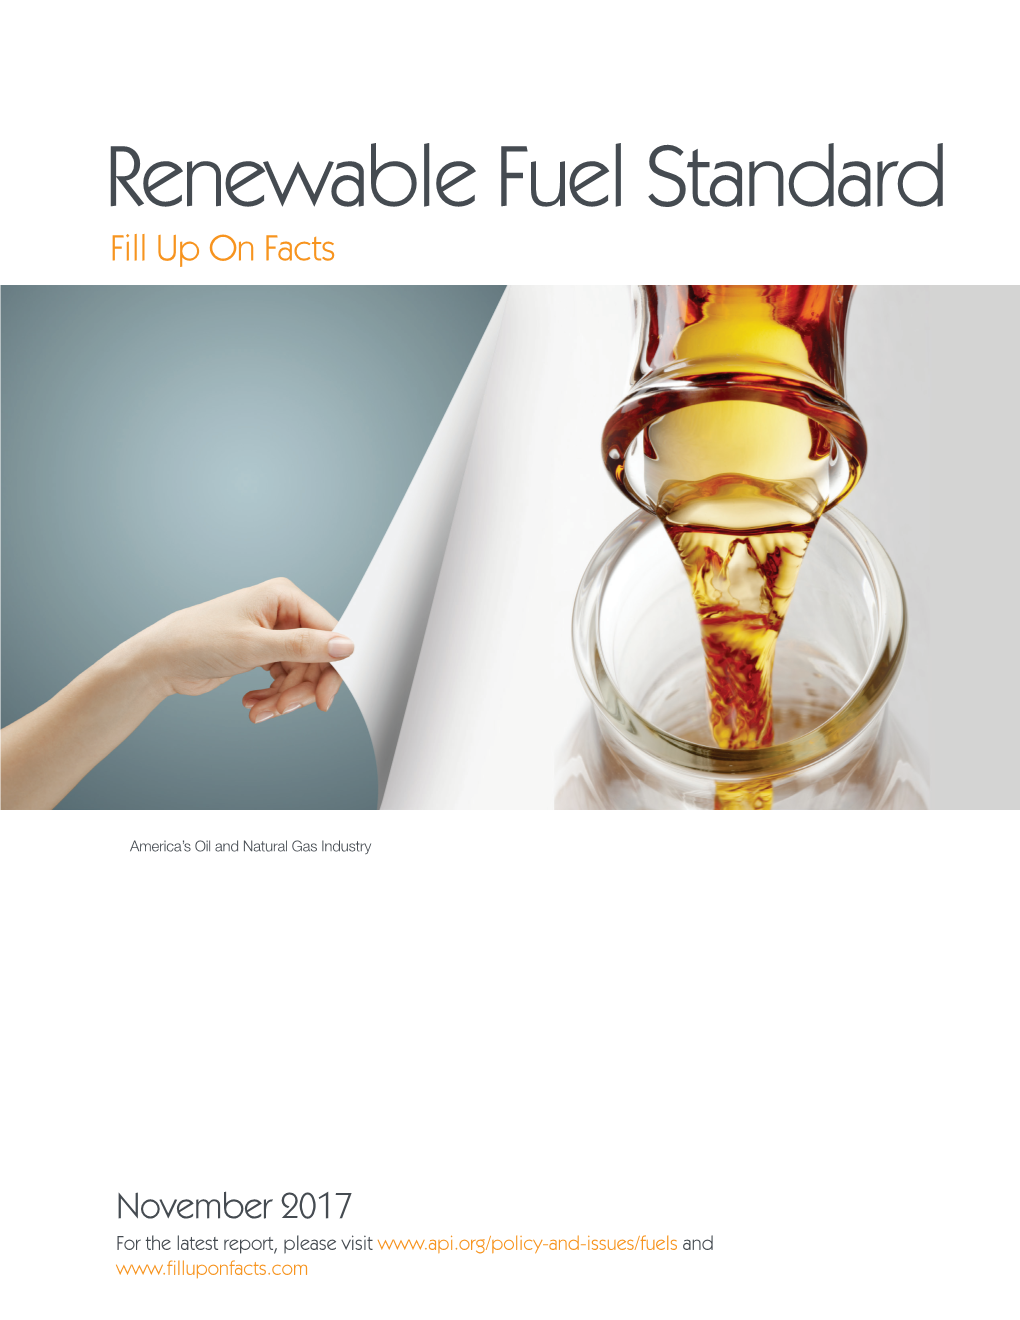 Renewable Fuel Standard Fill up on Facts